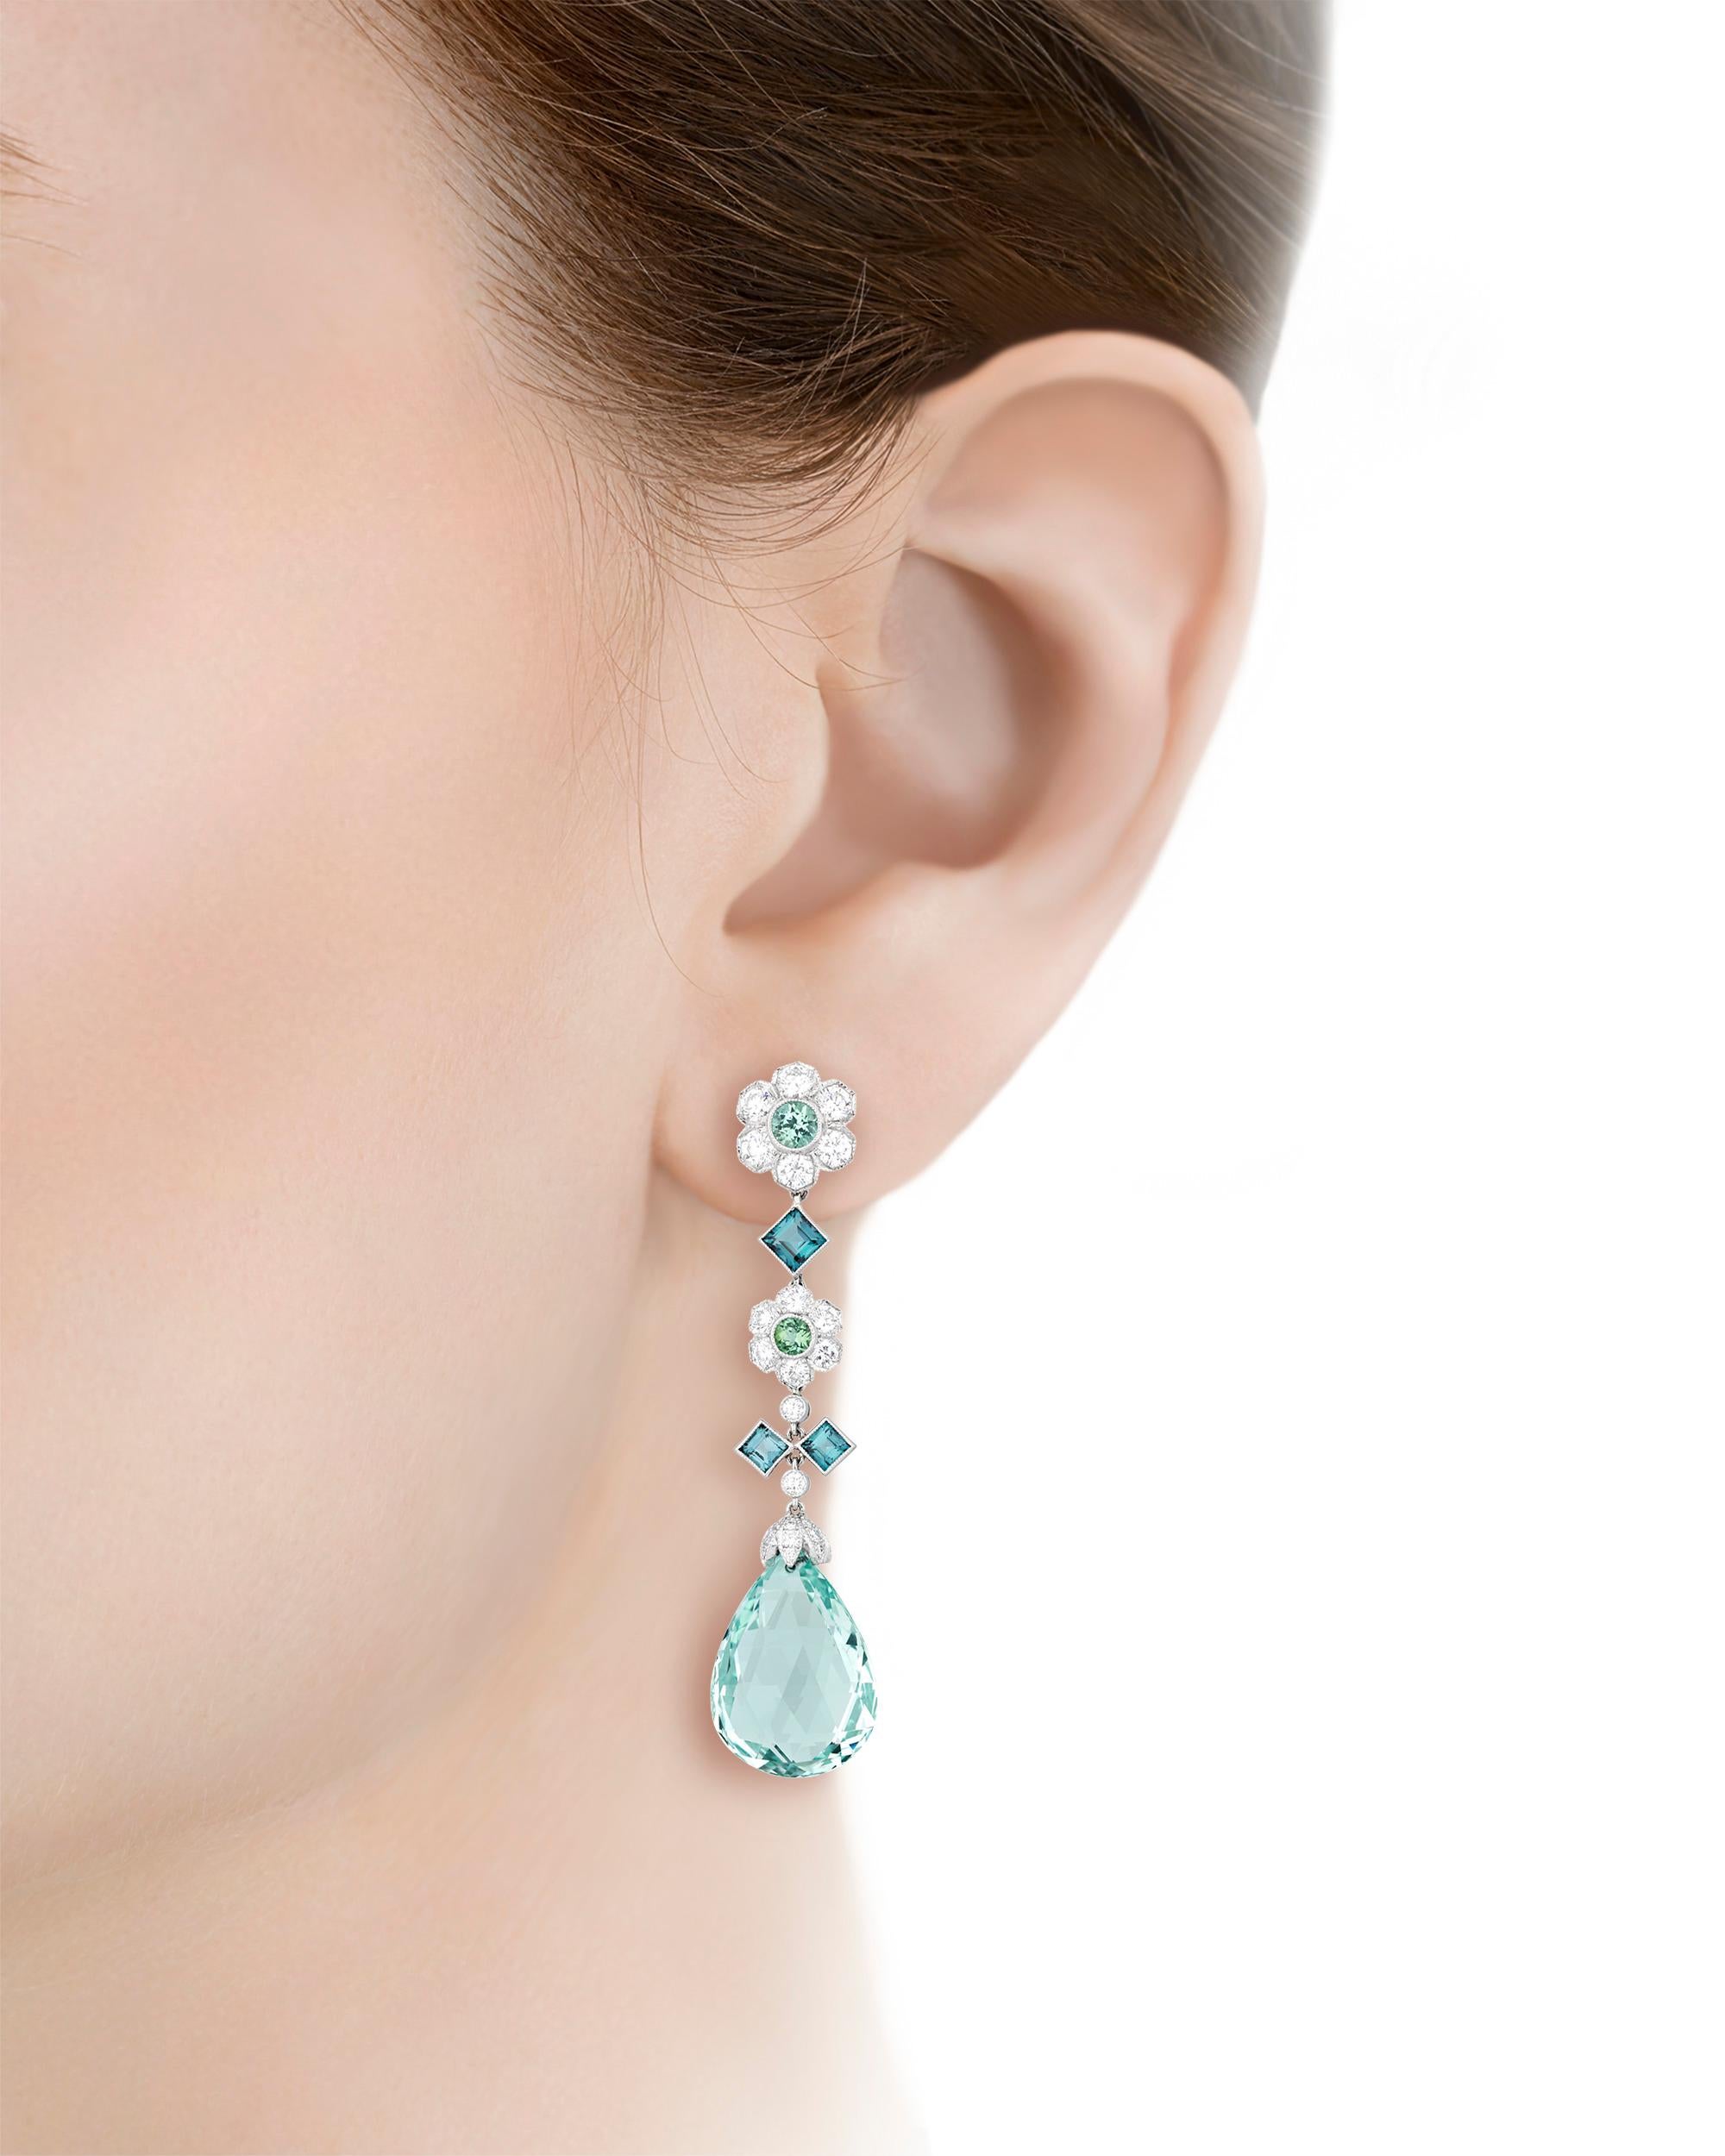 These scintillating Tiffany & Co. earrings present tourmalines possessing radiant shades of blue and green. The faceted tourmaline drops display the firm’s iconic “Tiffany Blue” hue and weigh a combined 19 carats. Additional round and square-cut